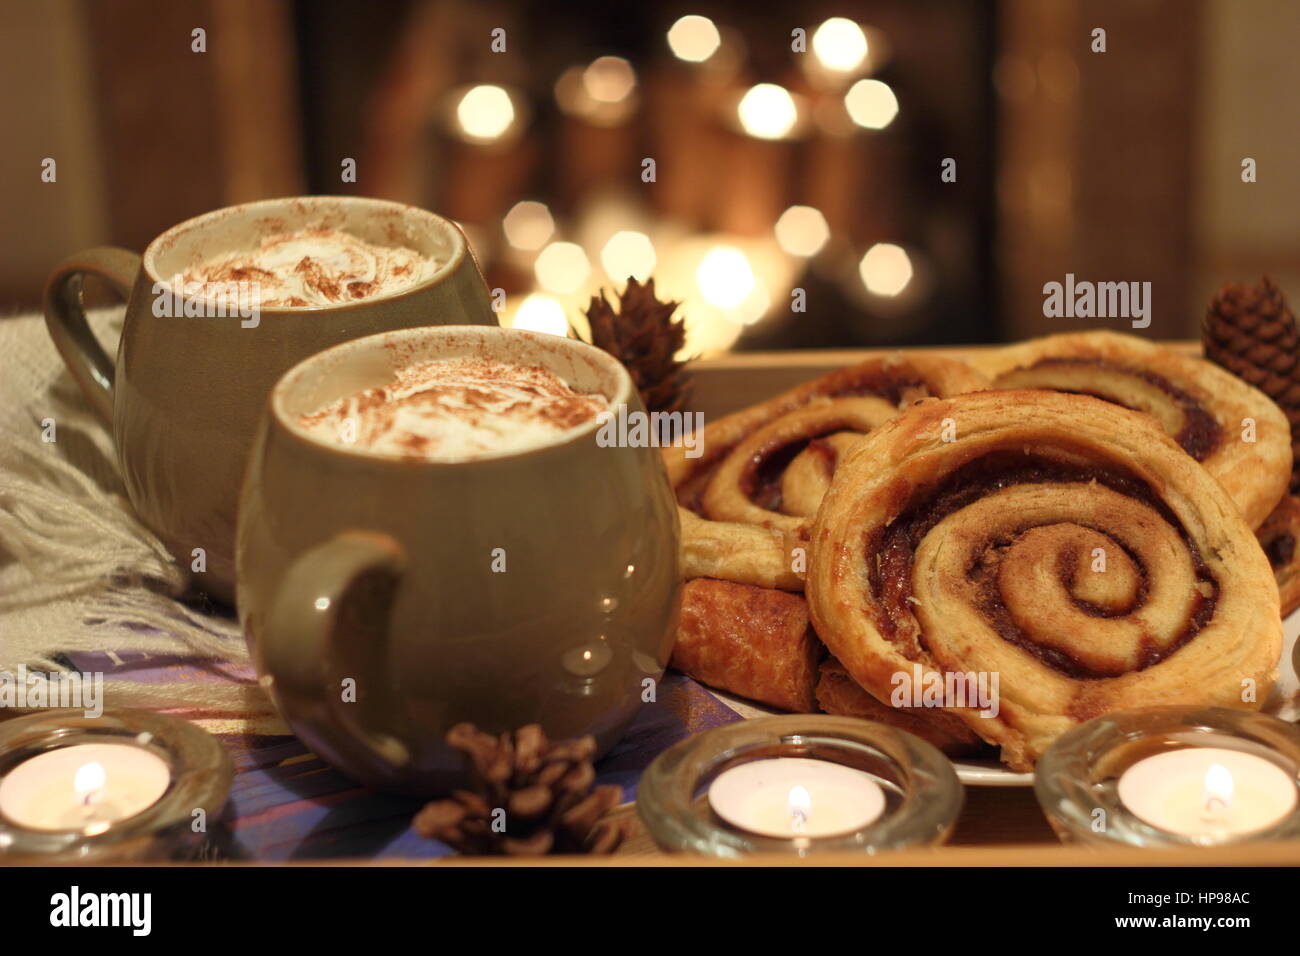 Creamy mugs of mocha - coffee and chocolate - are served with cinnamon buns by a candle lit open fireplace in a cosy English home Stock Photo